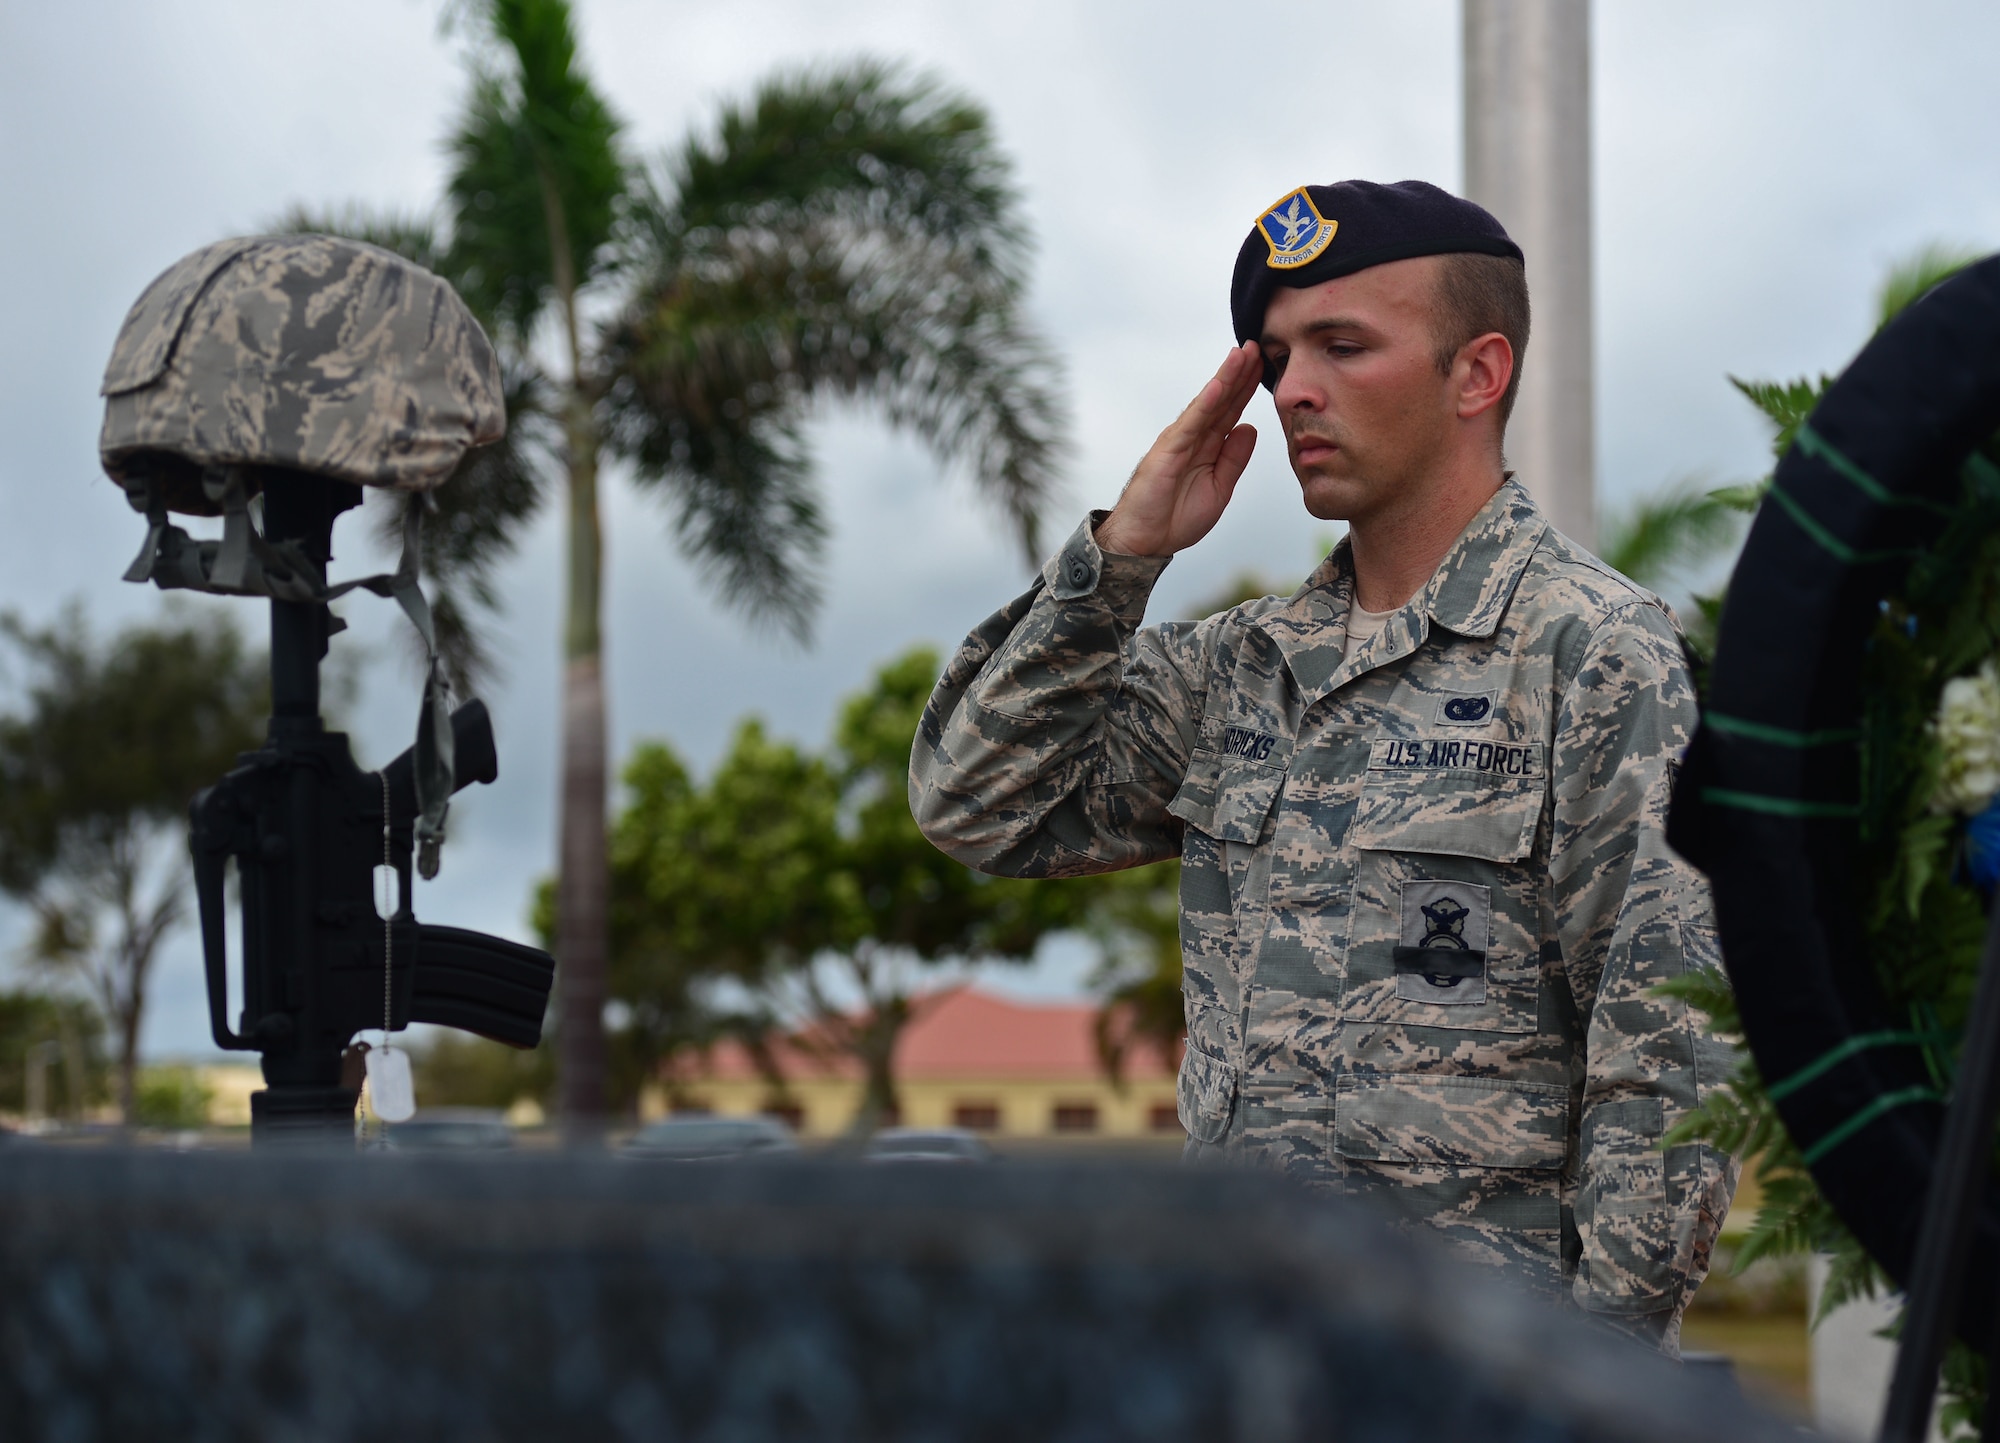 Senior Airman Steven Hendricks, 36th Security Forces Squadron member, salutes a fallen warrior memorial May 20, 2016, at Andersen Air Force Base, Guam. The symbolic battle cross is composed of a replica M4 carbine with a helmet at the top and boots in front. Additionally, 10 dog tags hang from the rifle detailing fallen Airmen and the name of the operation they supported. The vigil was held in honor of fallen security forces members on the occasion of Police Week. (U.S. Air Force photo by Senior Airman Joshua Smoot)